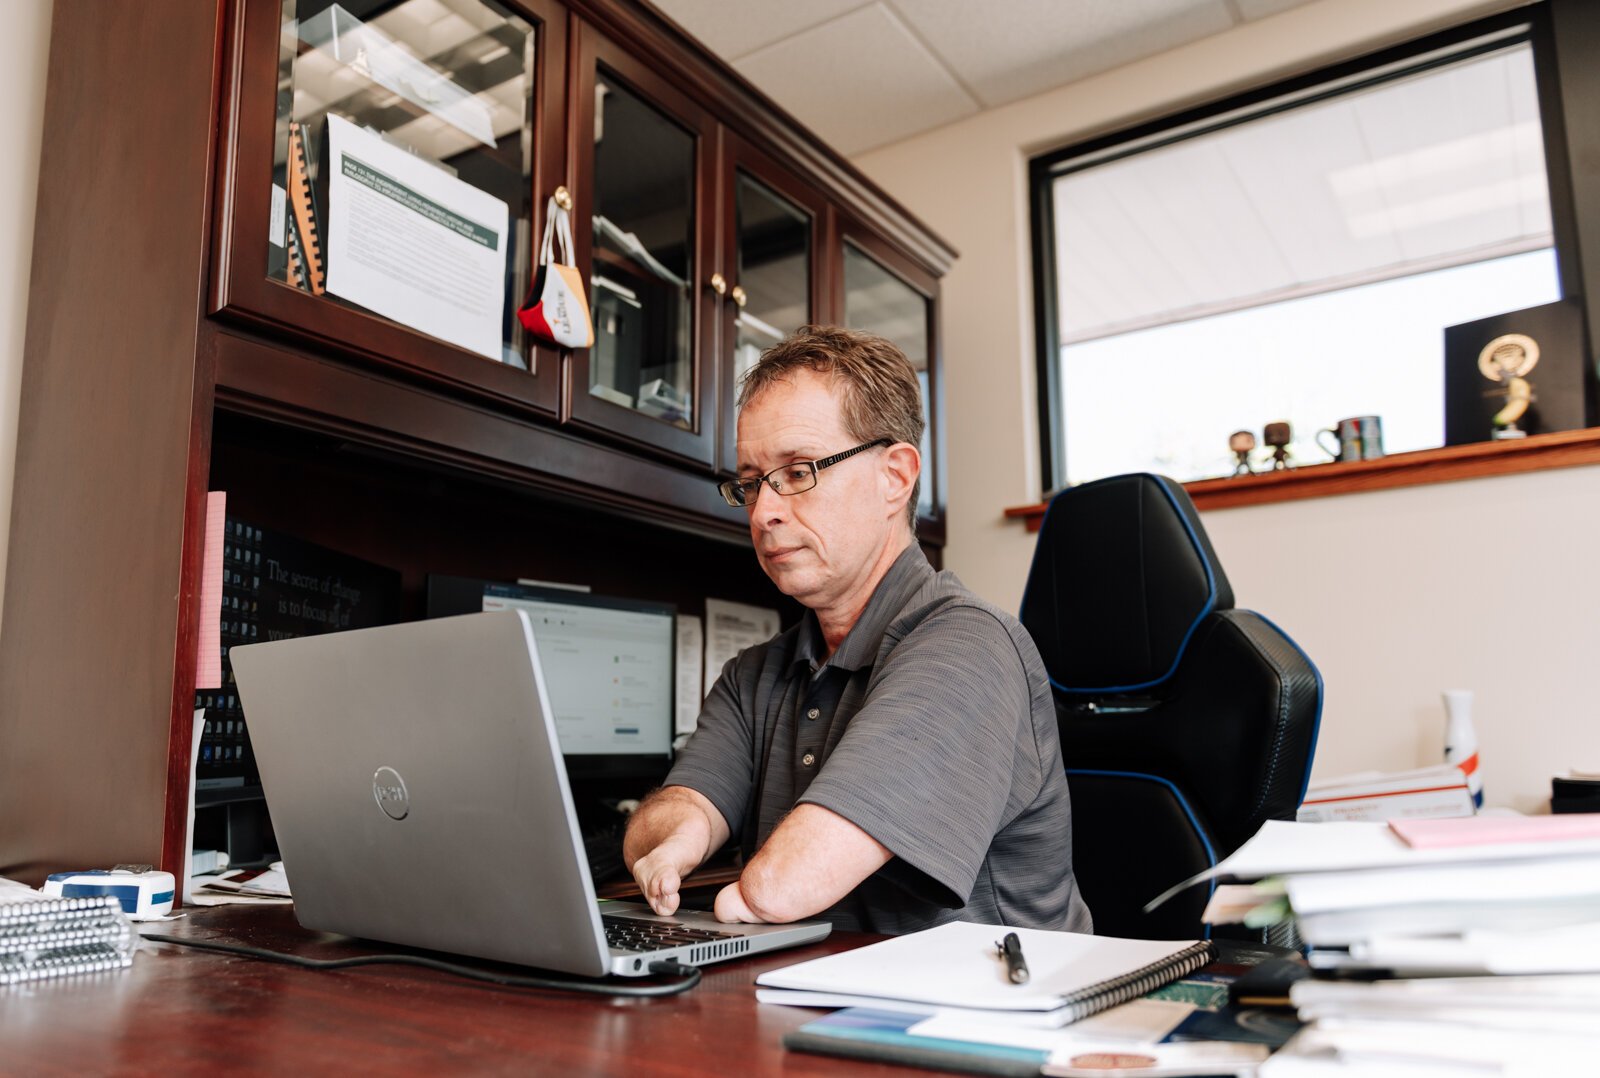 John Guingrich, President/CEO of The League works at his desk at The League For the Blind - Disabled.